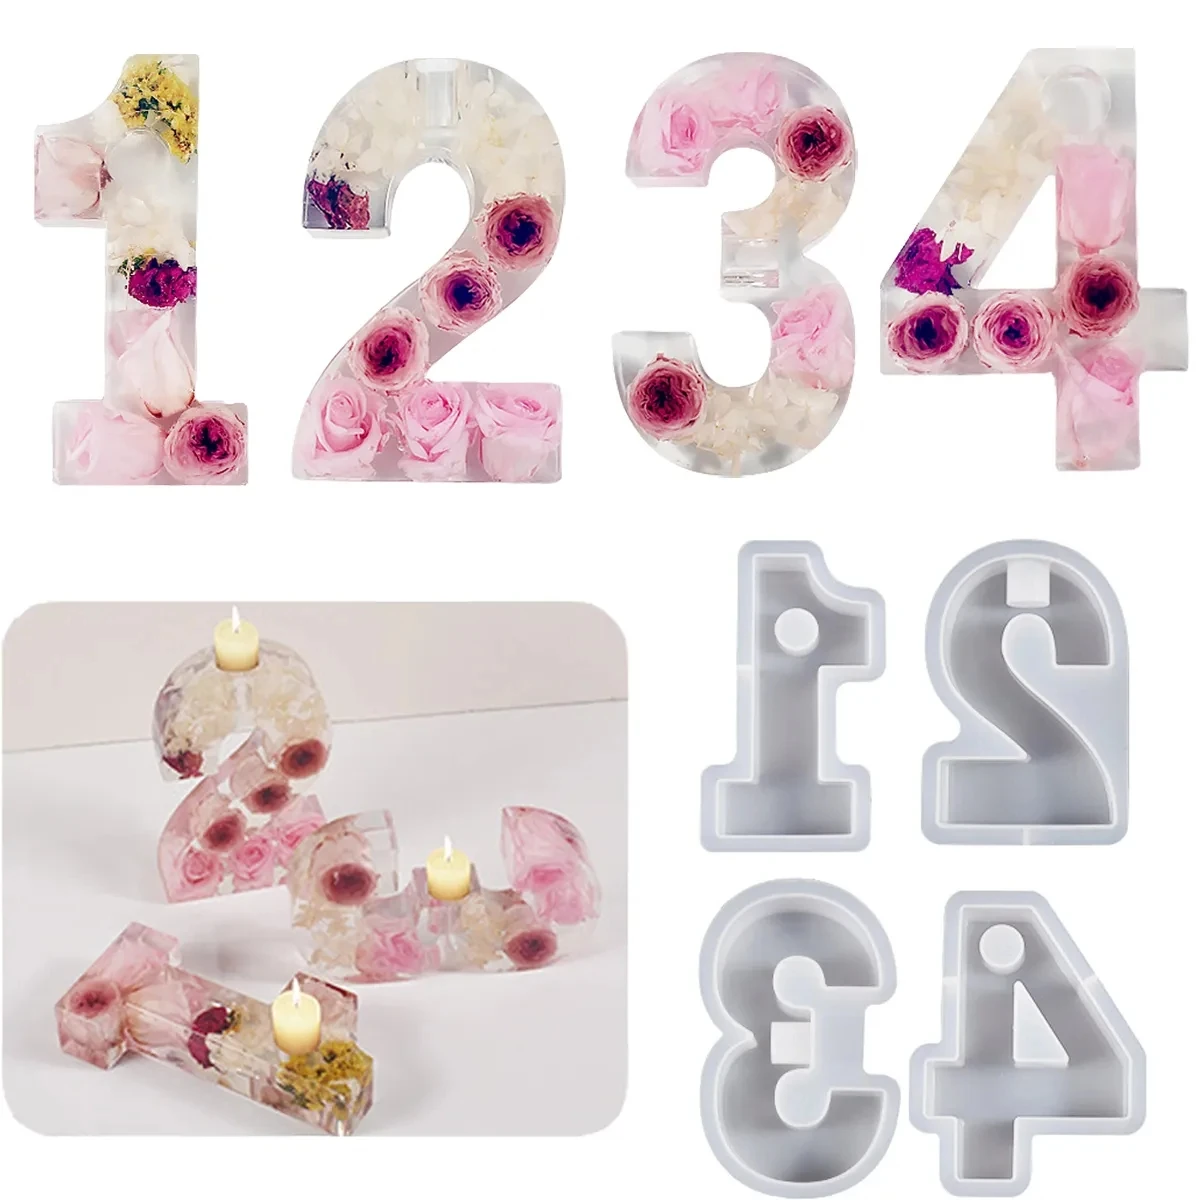 

1-4 Numbers Shape DIY Silicone Mold 3D Handmade Candle Holder Molds Gypsum Resin Mold Craft Candlestick Mould Decoration